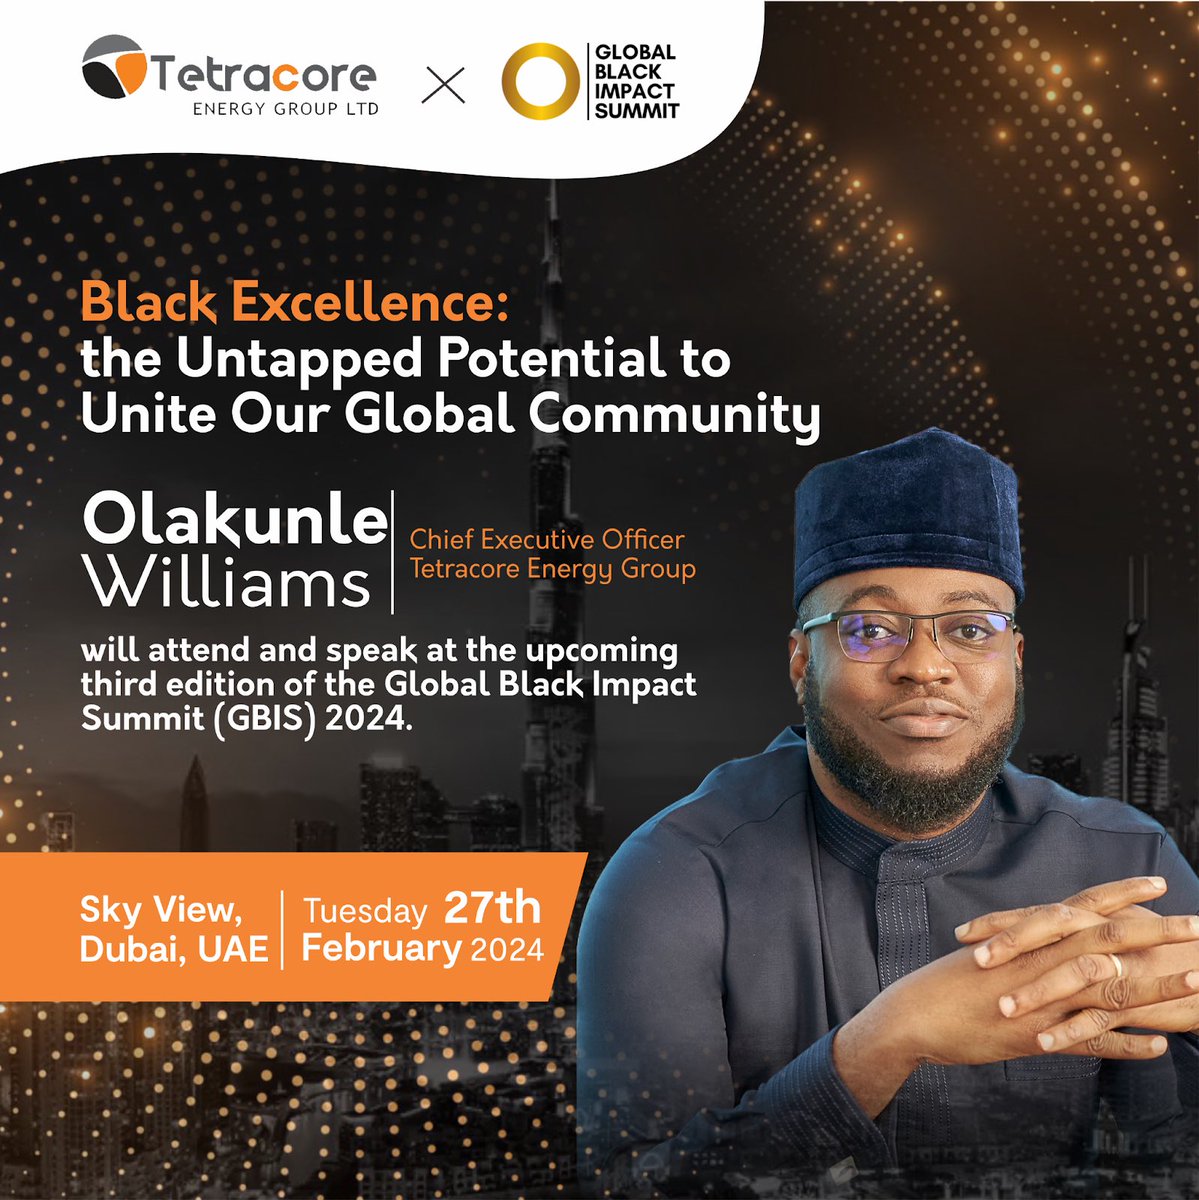 Our Chief Executive Officer, @OlakunleWiliams will be participating as a speaker at the upcoming Global Black Impact Summit 2024, and we anticipate engaging in stimulating discussions during the event.

#TetracoreEnergyGroup #GBIS2024 #Tetracore